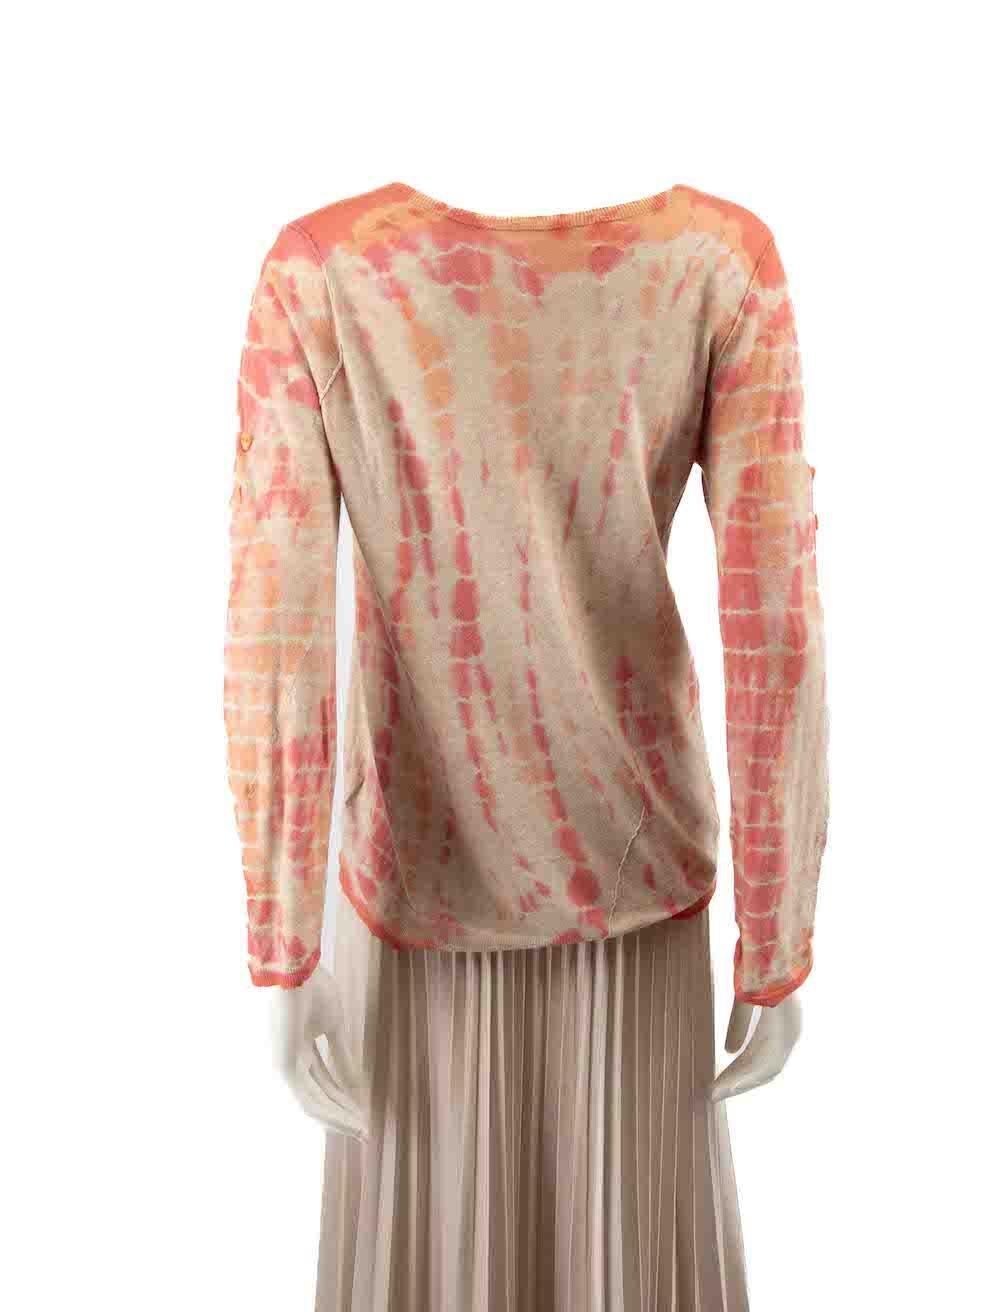 Zadig & Voltaire Tie Dye Pattern Long Sleeve Top Size XS In Good Condition For Sale In London, GB